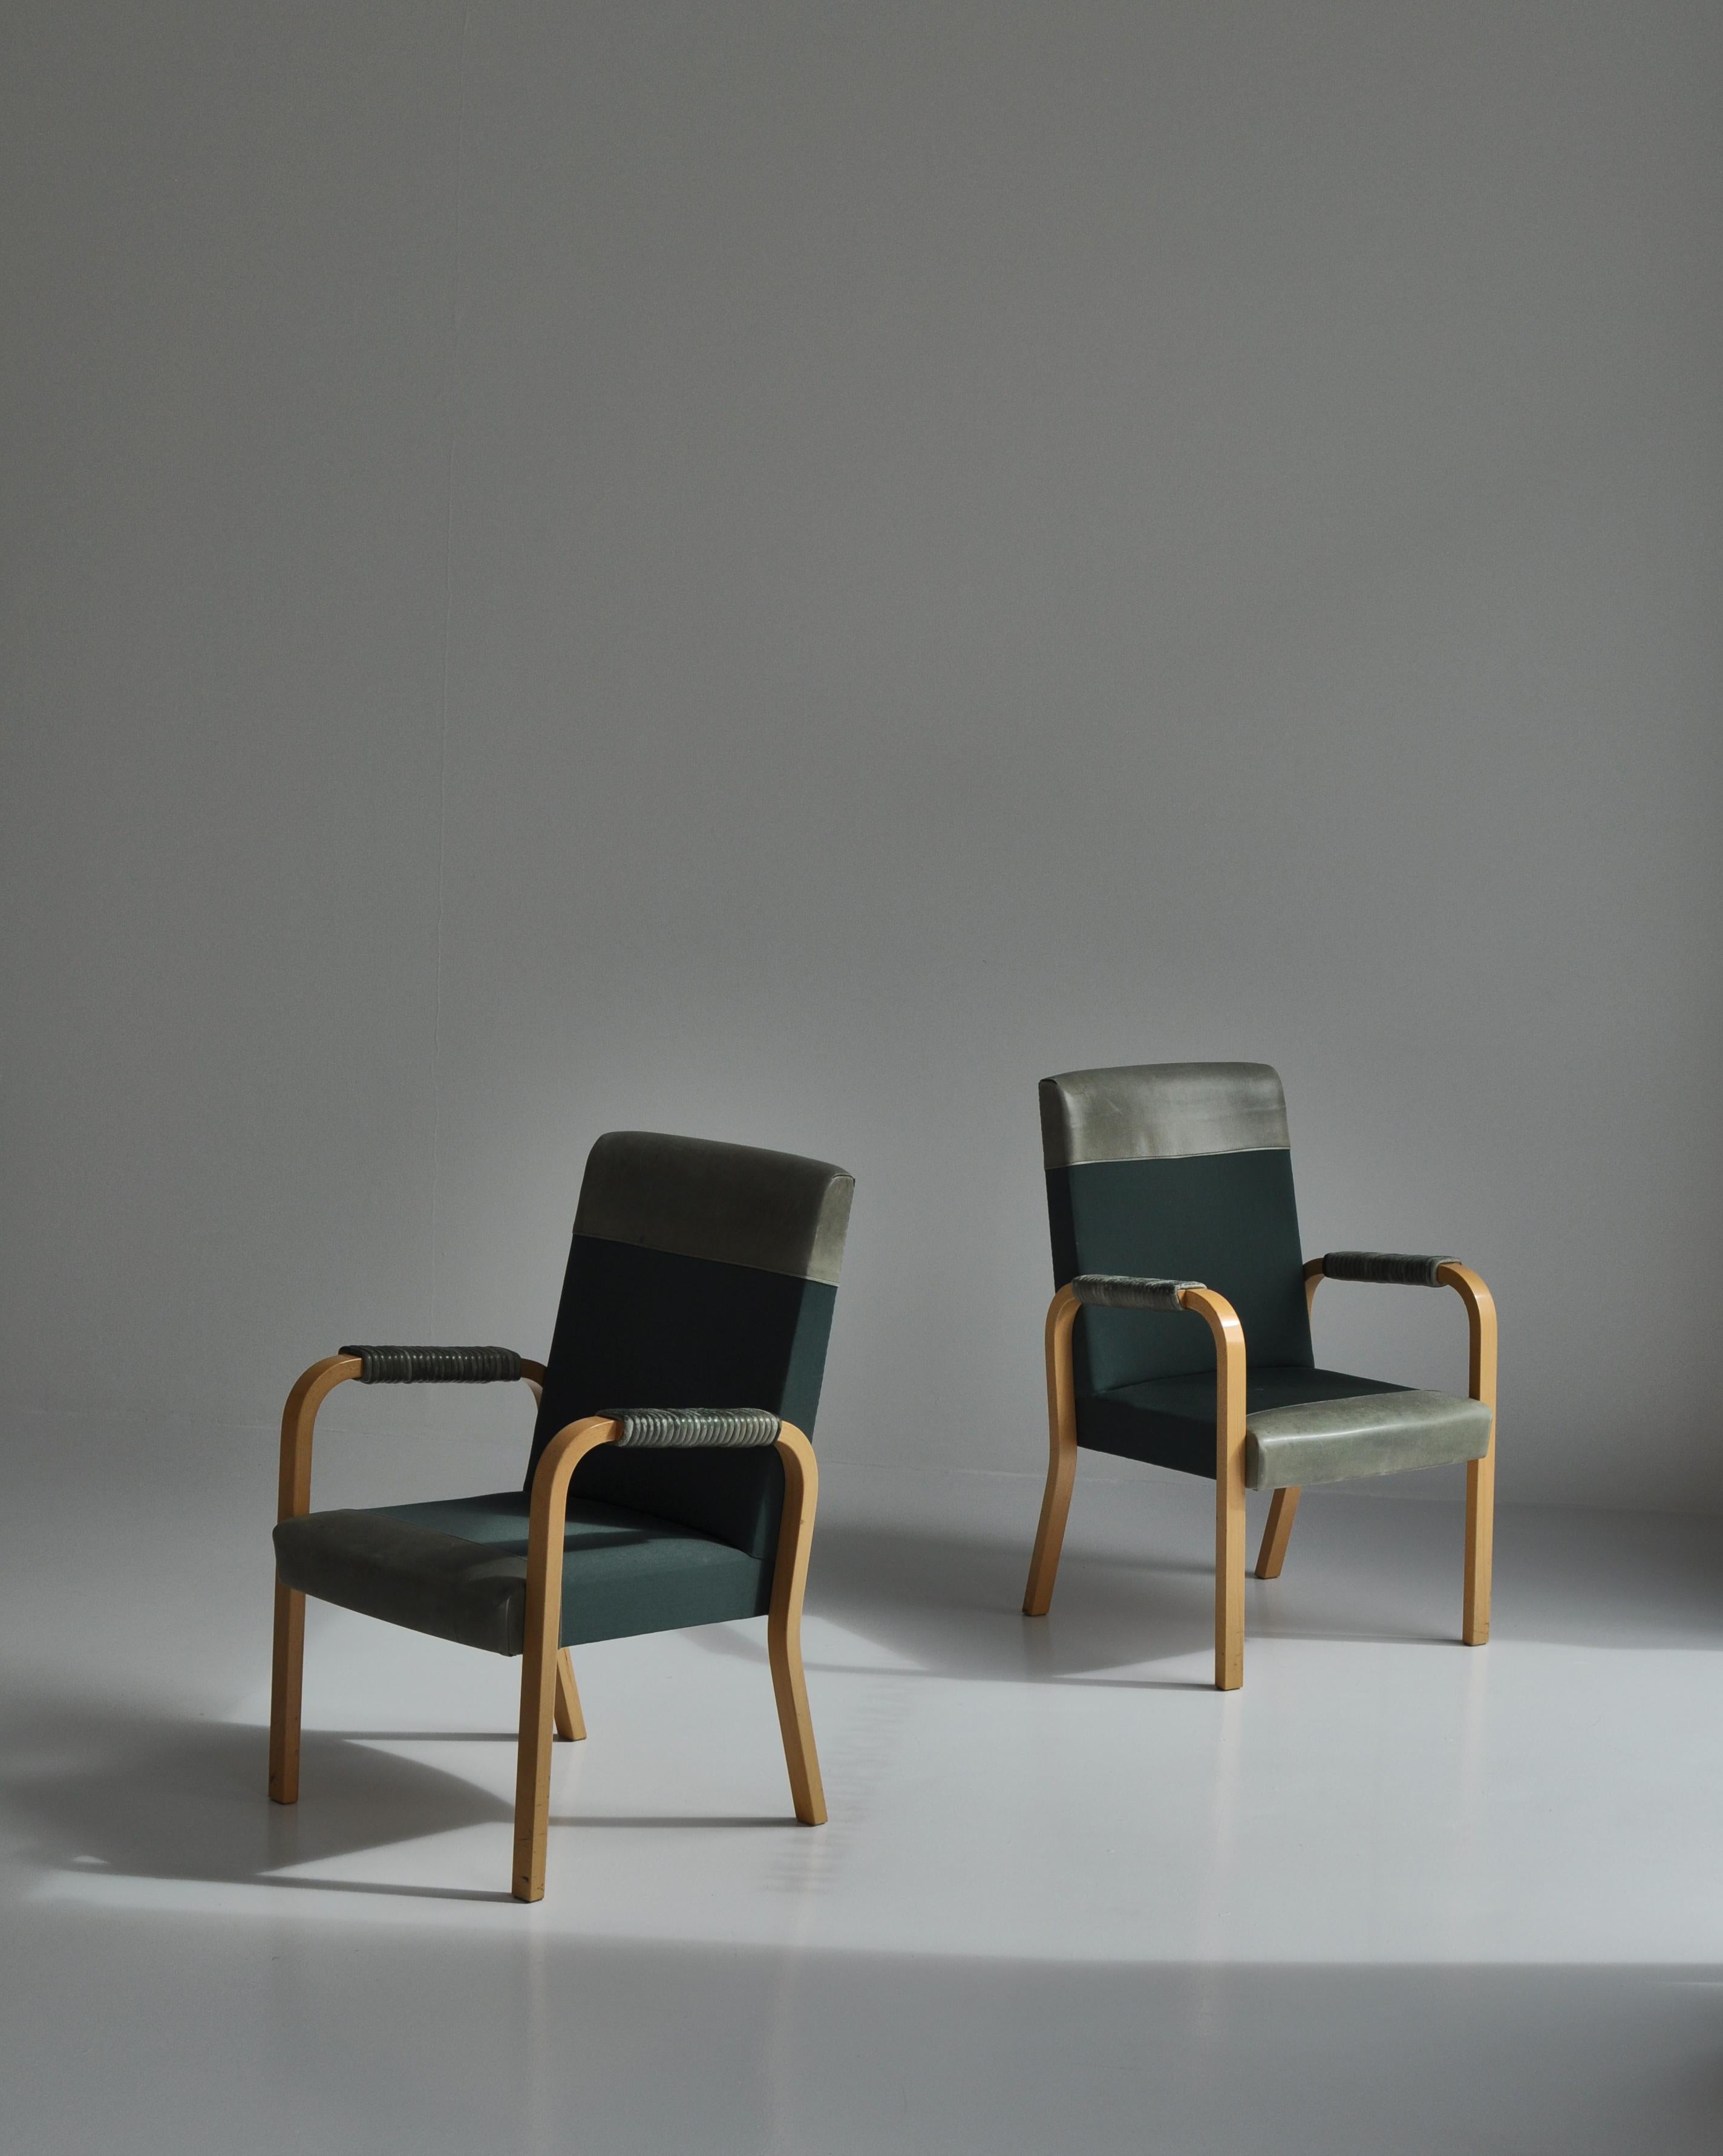 A set of rare Alvar Aalto chairs made for the Enso-Gutzeit (